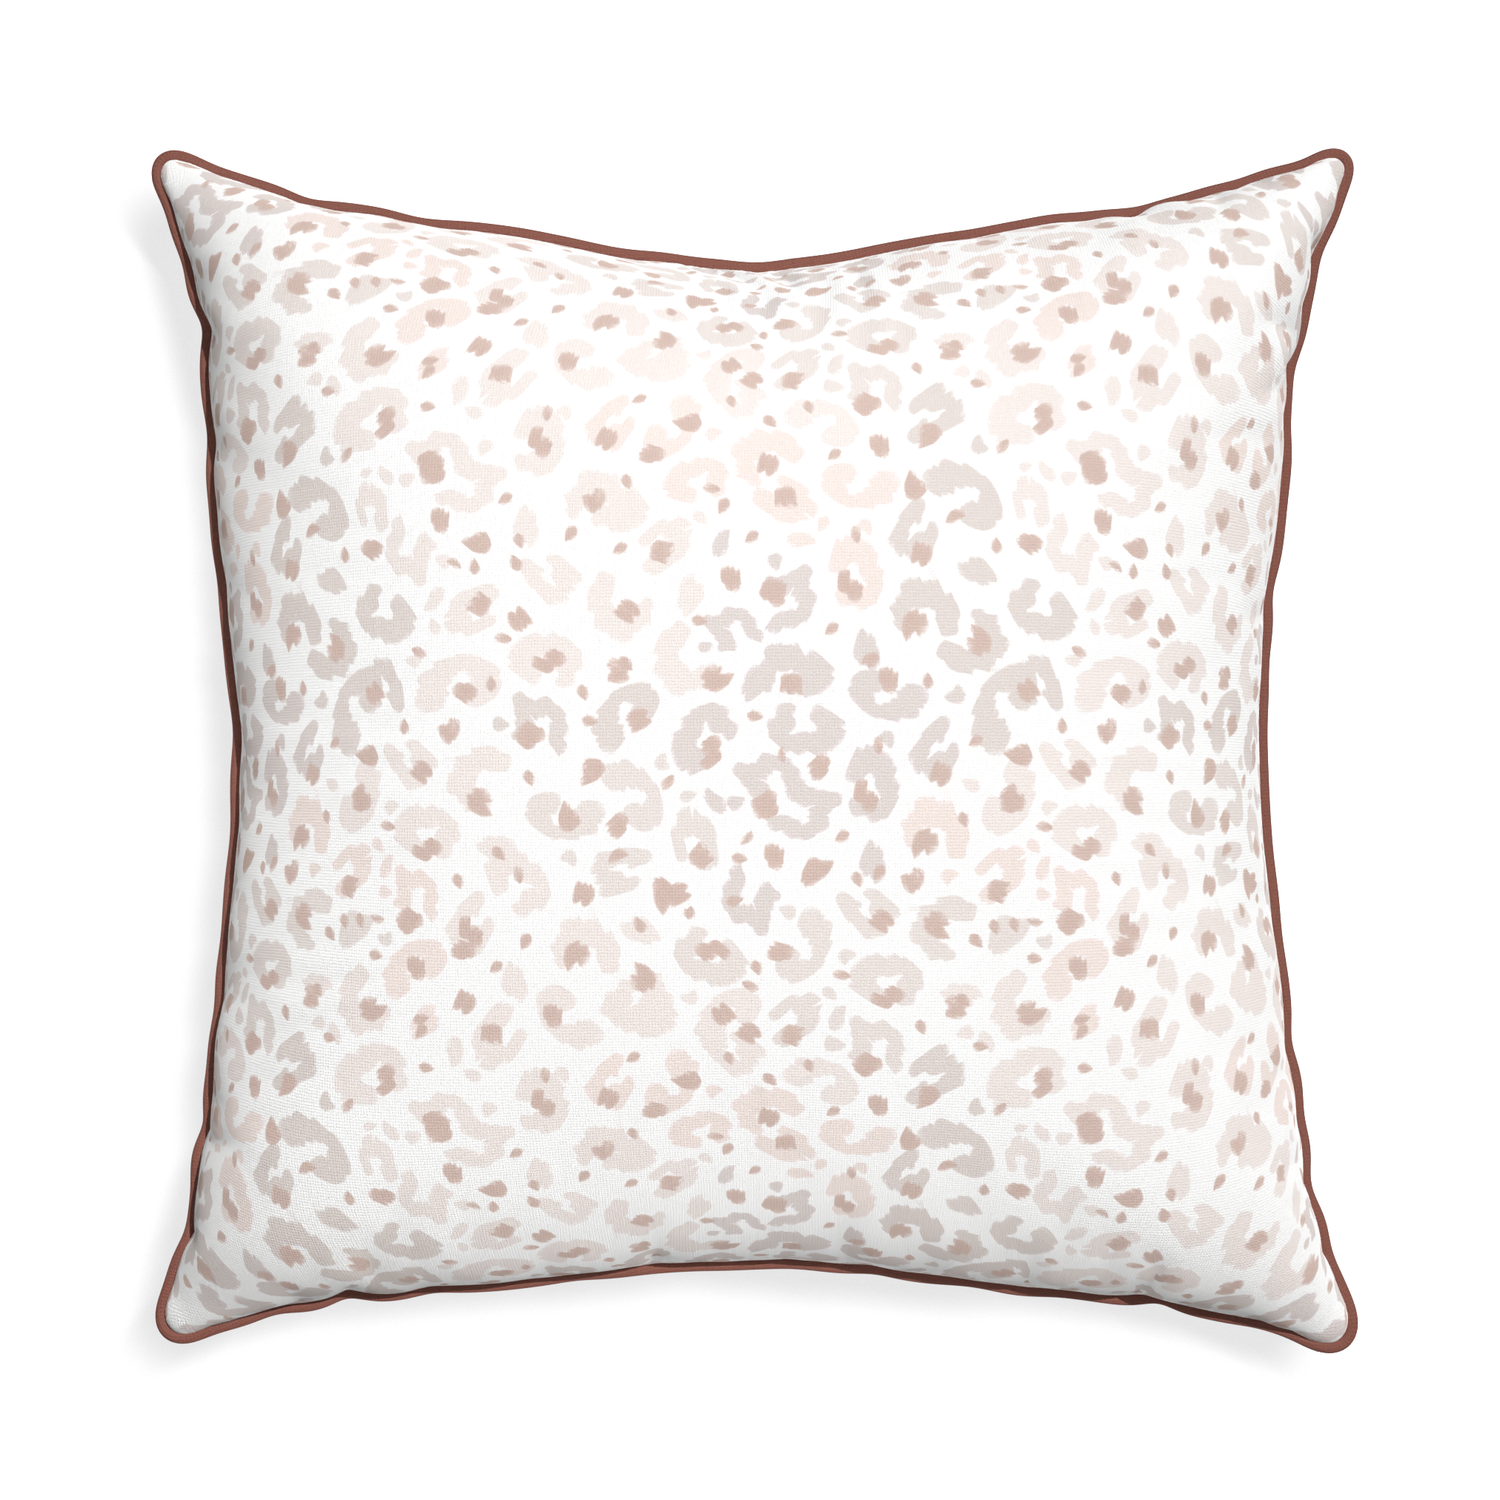 Euro-sham rosie custom beige animal printpillow with w piping on white background